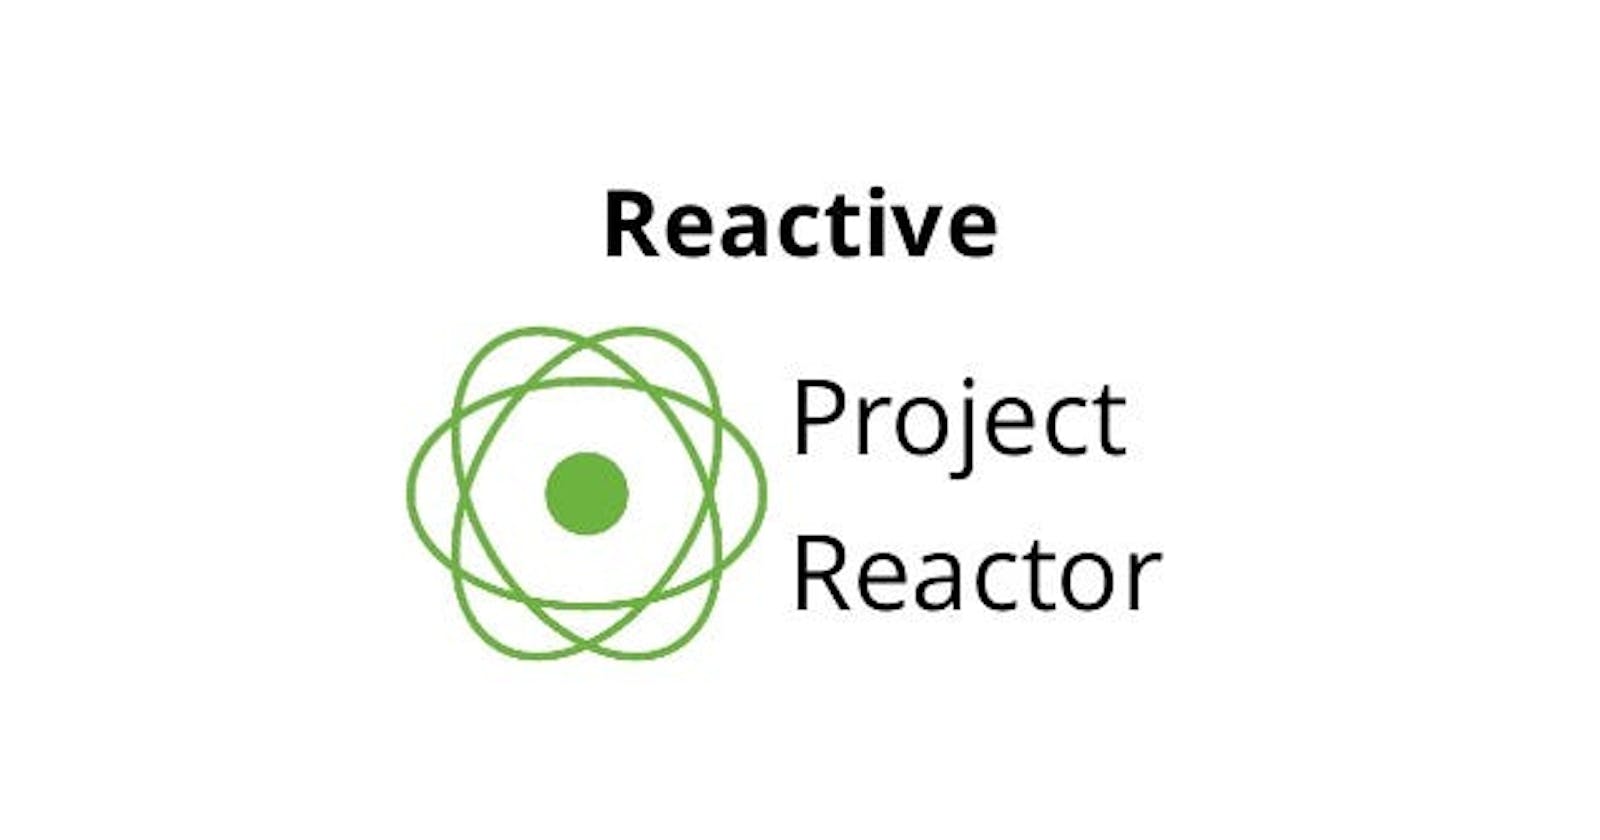 Reactive programming is a programming paradigm that has gained popularity in recent years.